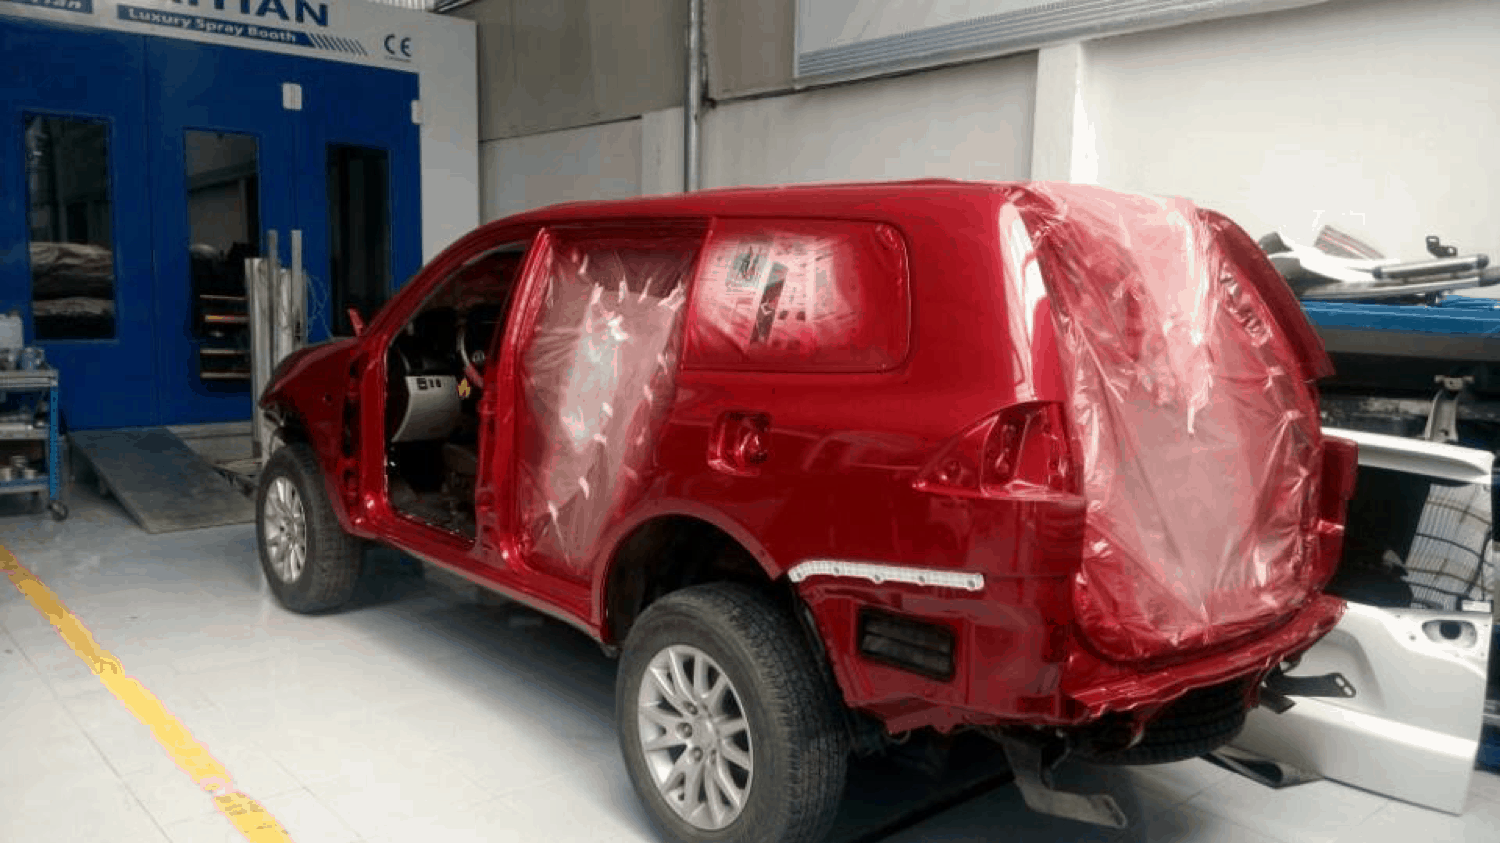 High-class New Car Body Paint Service, Thanh Phong Auto Ho Chi Minh City 2022